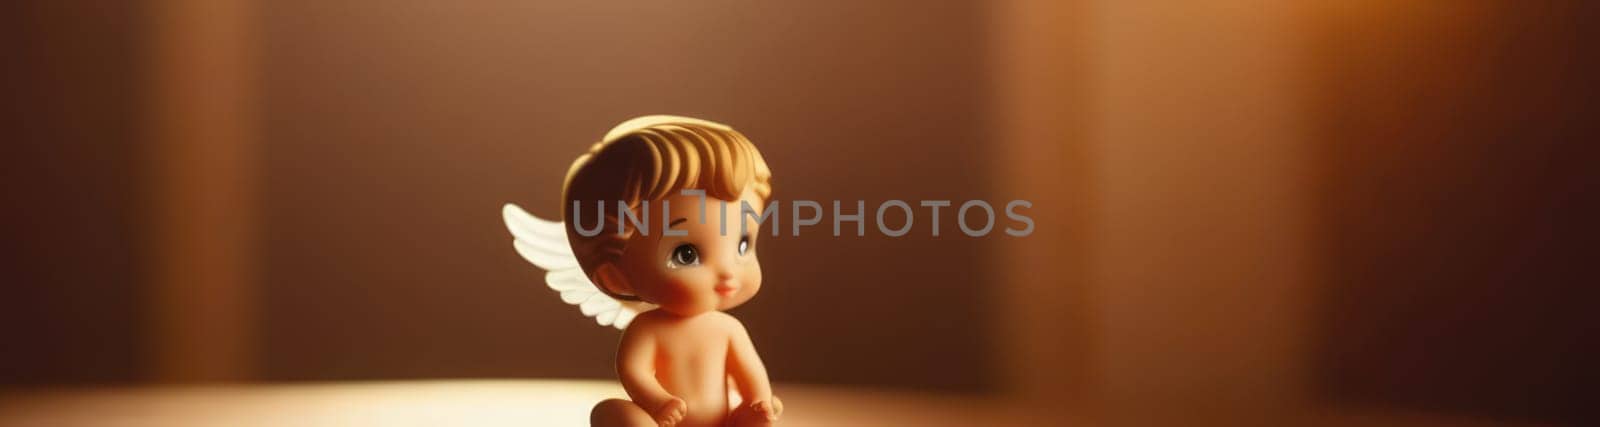 Illustration of greeting card of figurine of cute, funny baby cupid angel with gold curly hair on pastel colors background. Promotion, shopping template for love and valentines, mothers day concept. by Angelsmoon